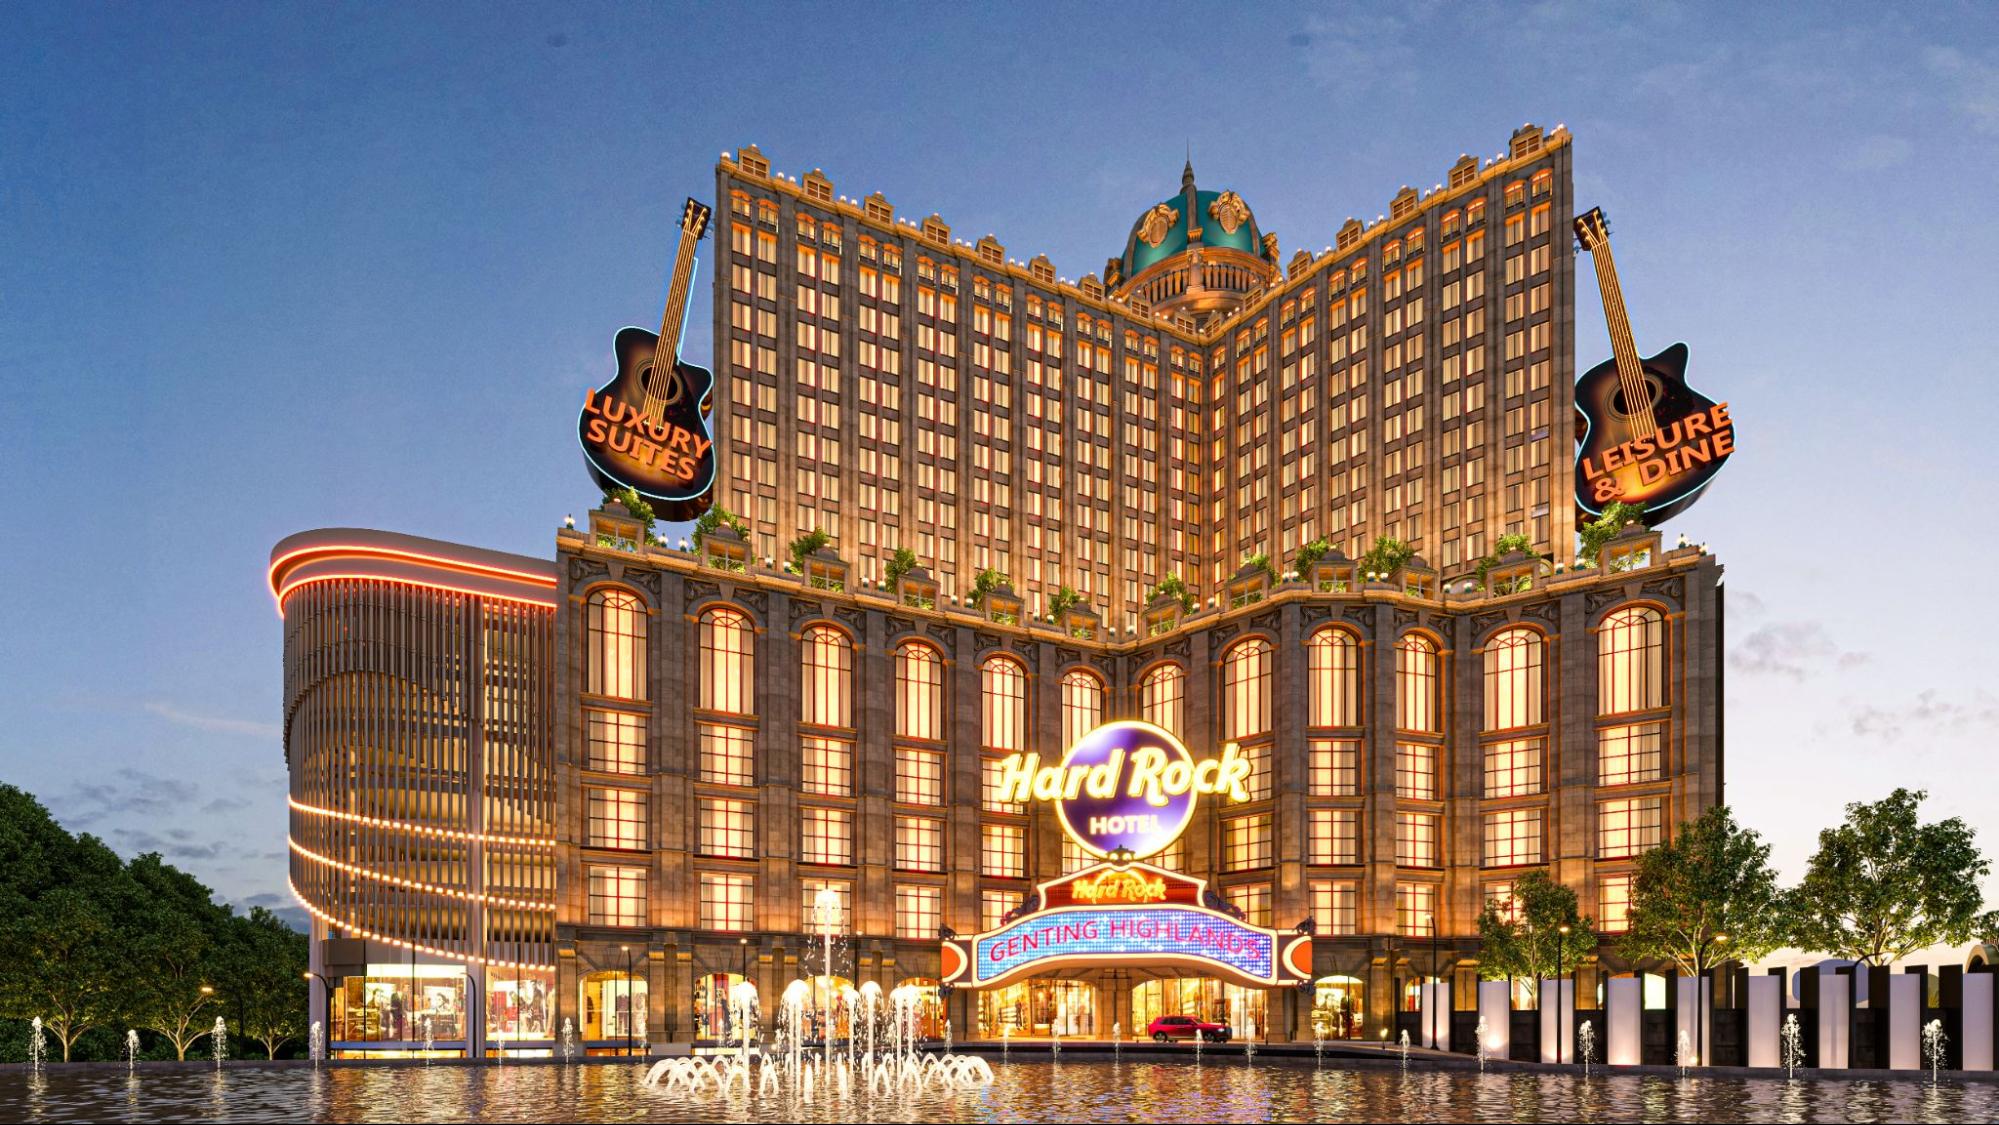 Artist visual - Hard Rock Hotel opening at Genting Highlands in 2027